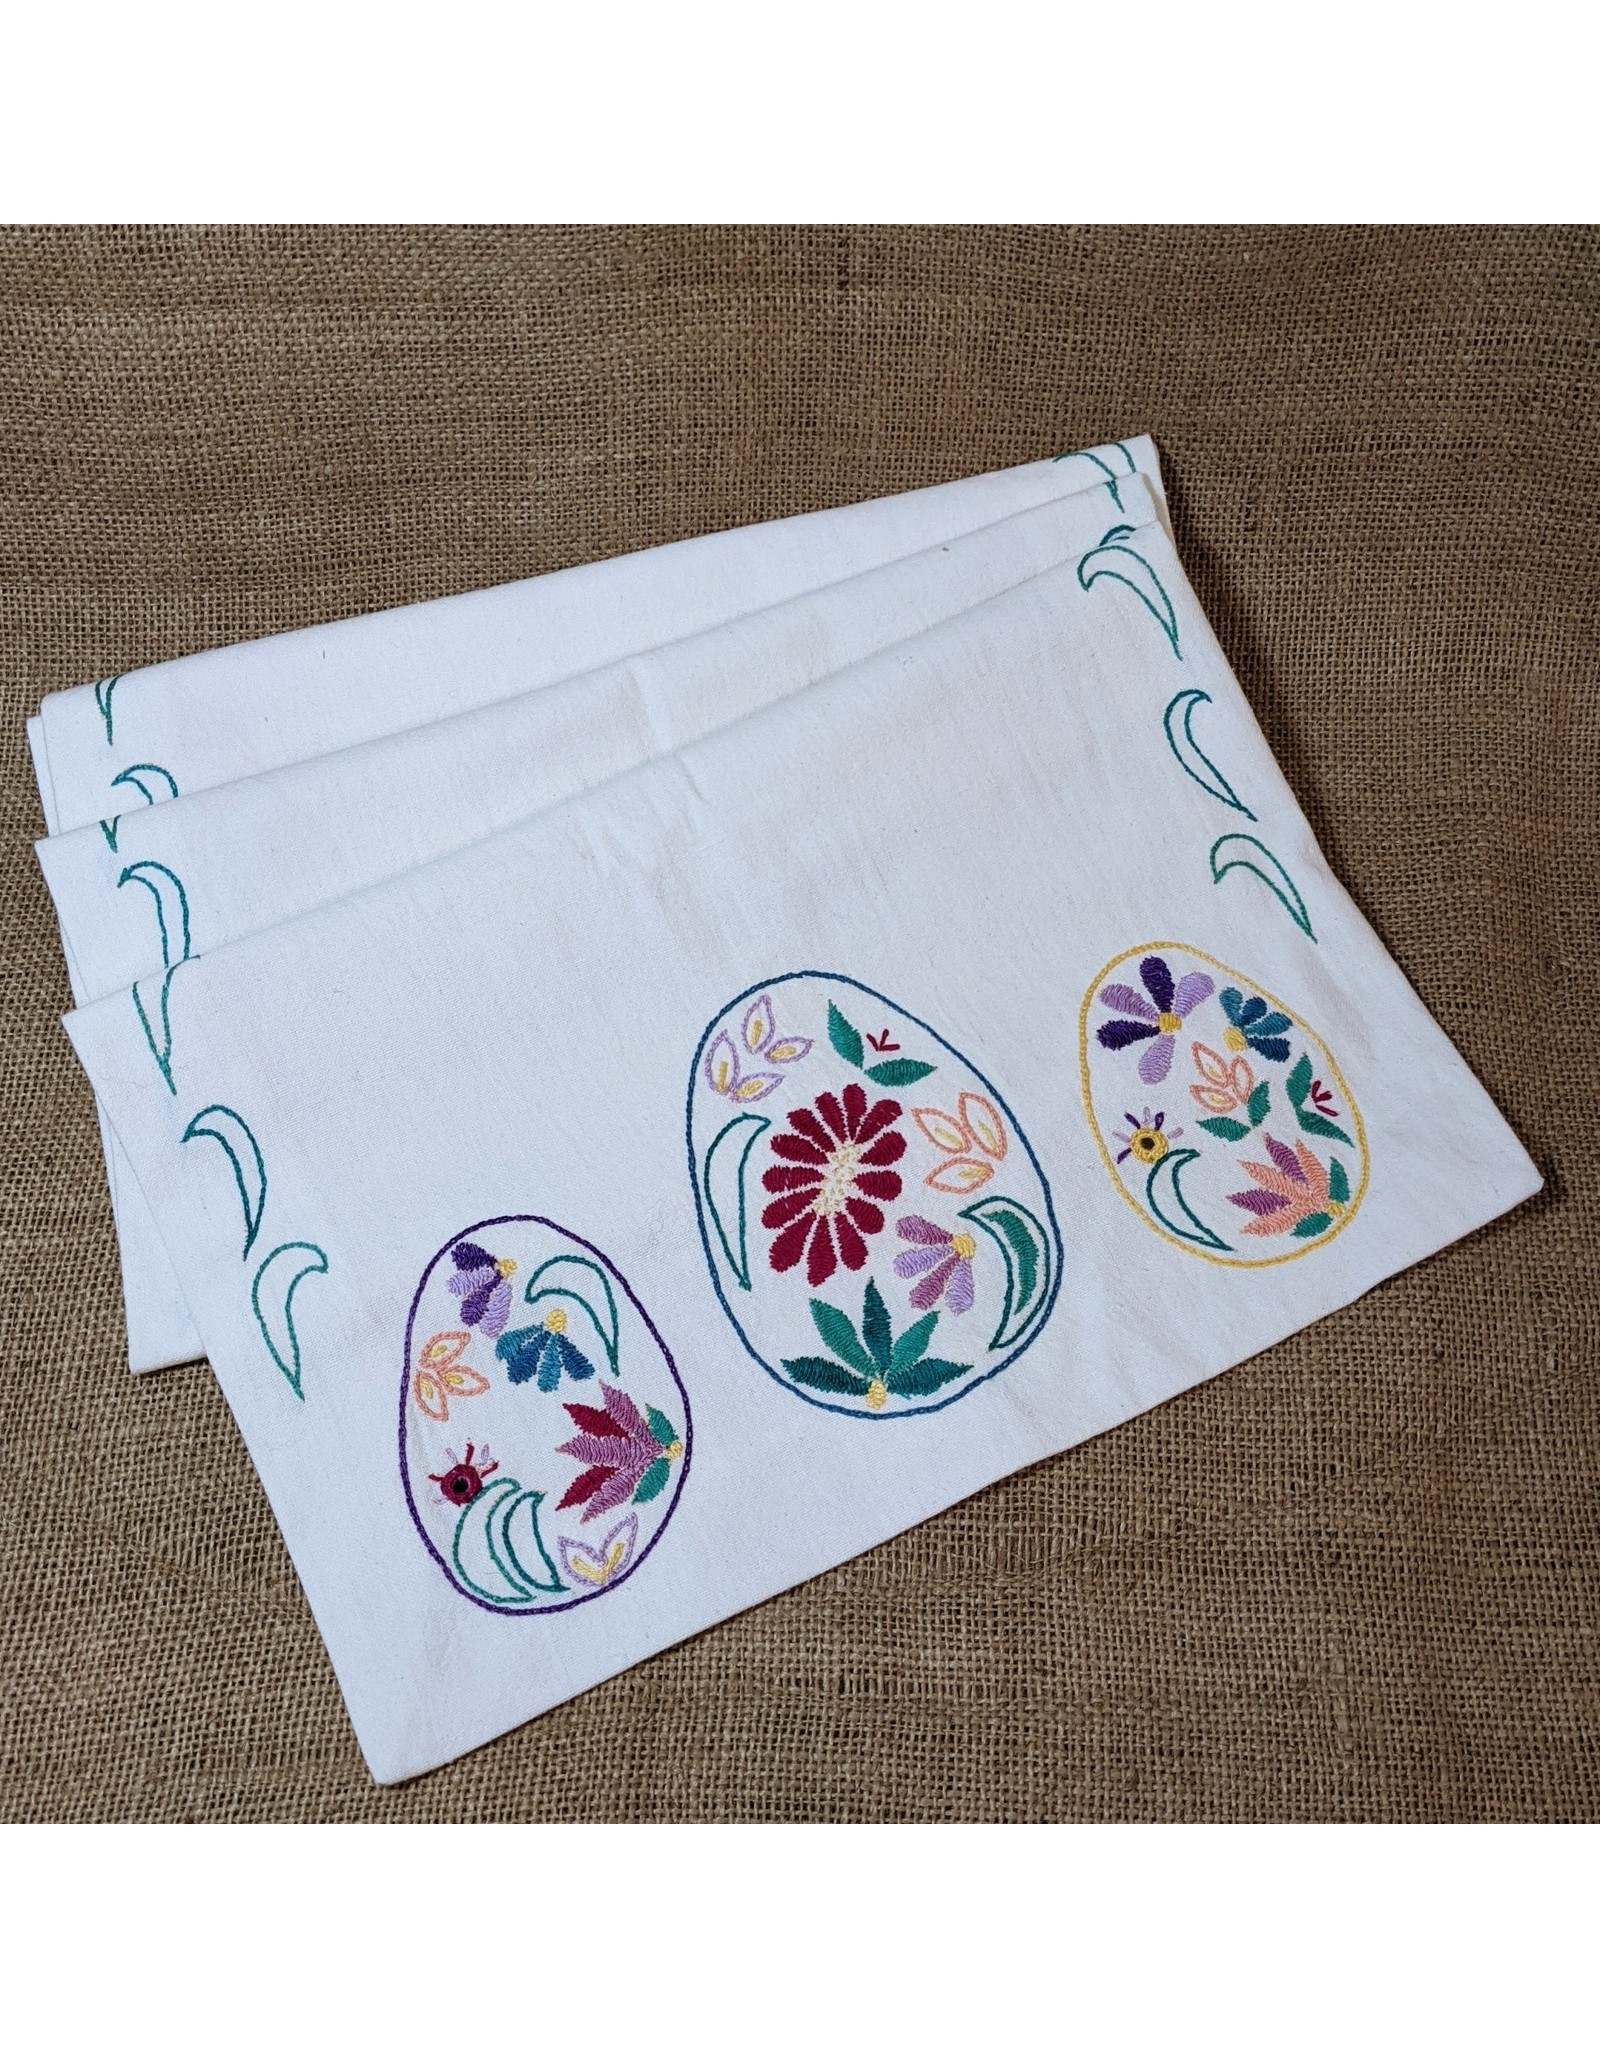 Ten Thousand Villages CLEARANCE Easter Egg Table Runner, India